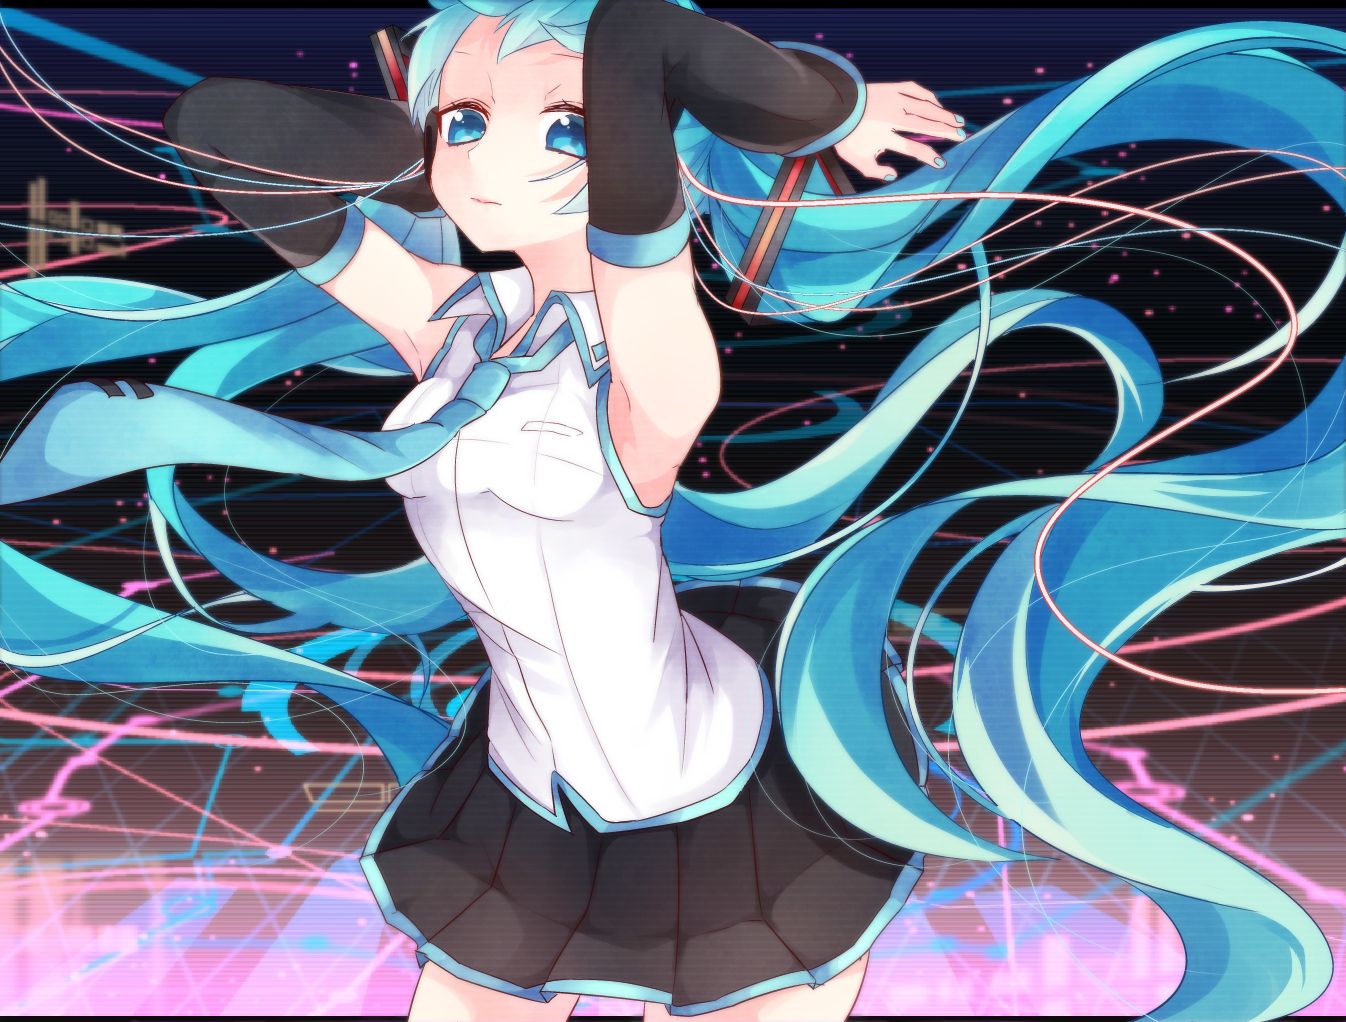 Assorted Miku images after a long absence. 24